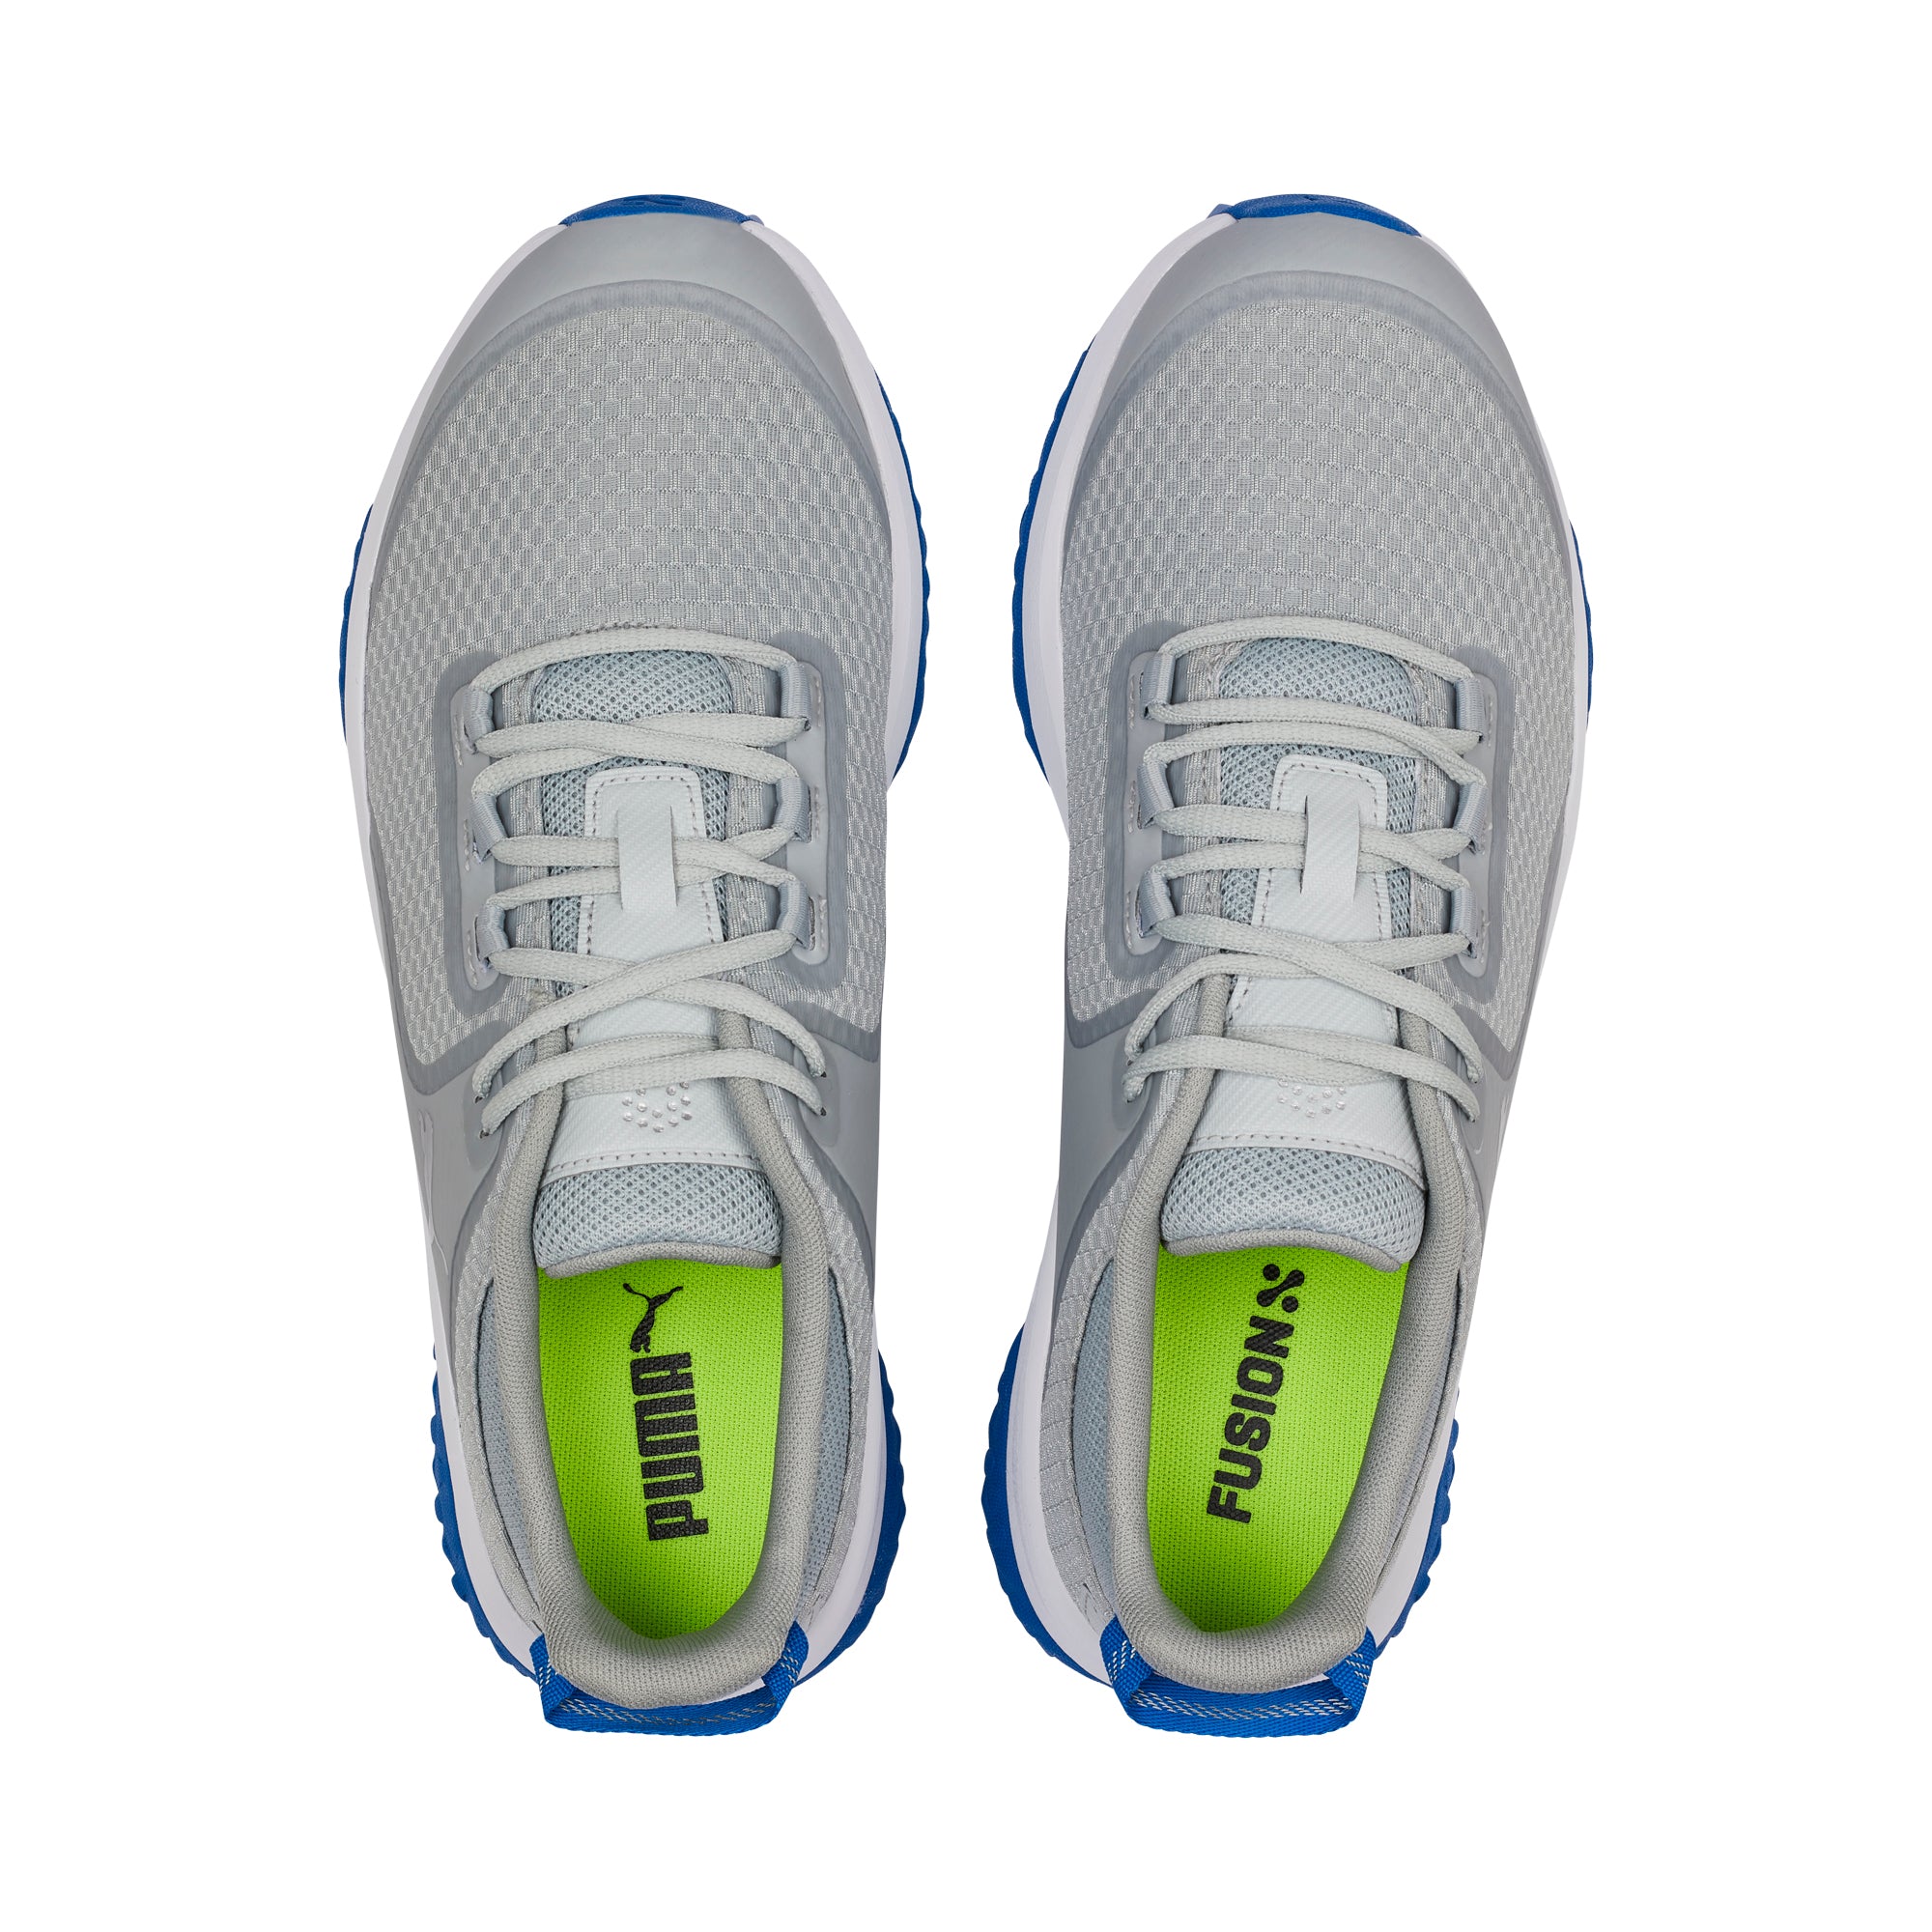 FUSION GRIP Spikeless Golf Shoes